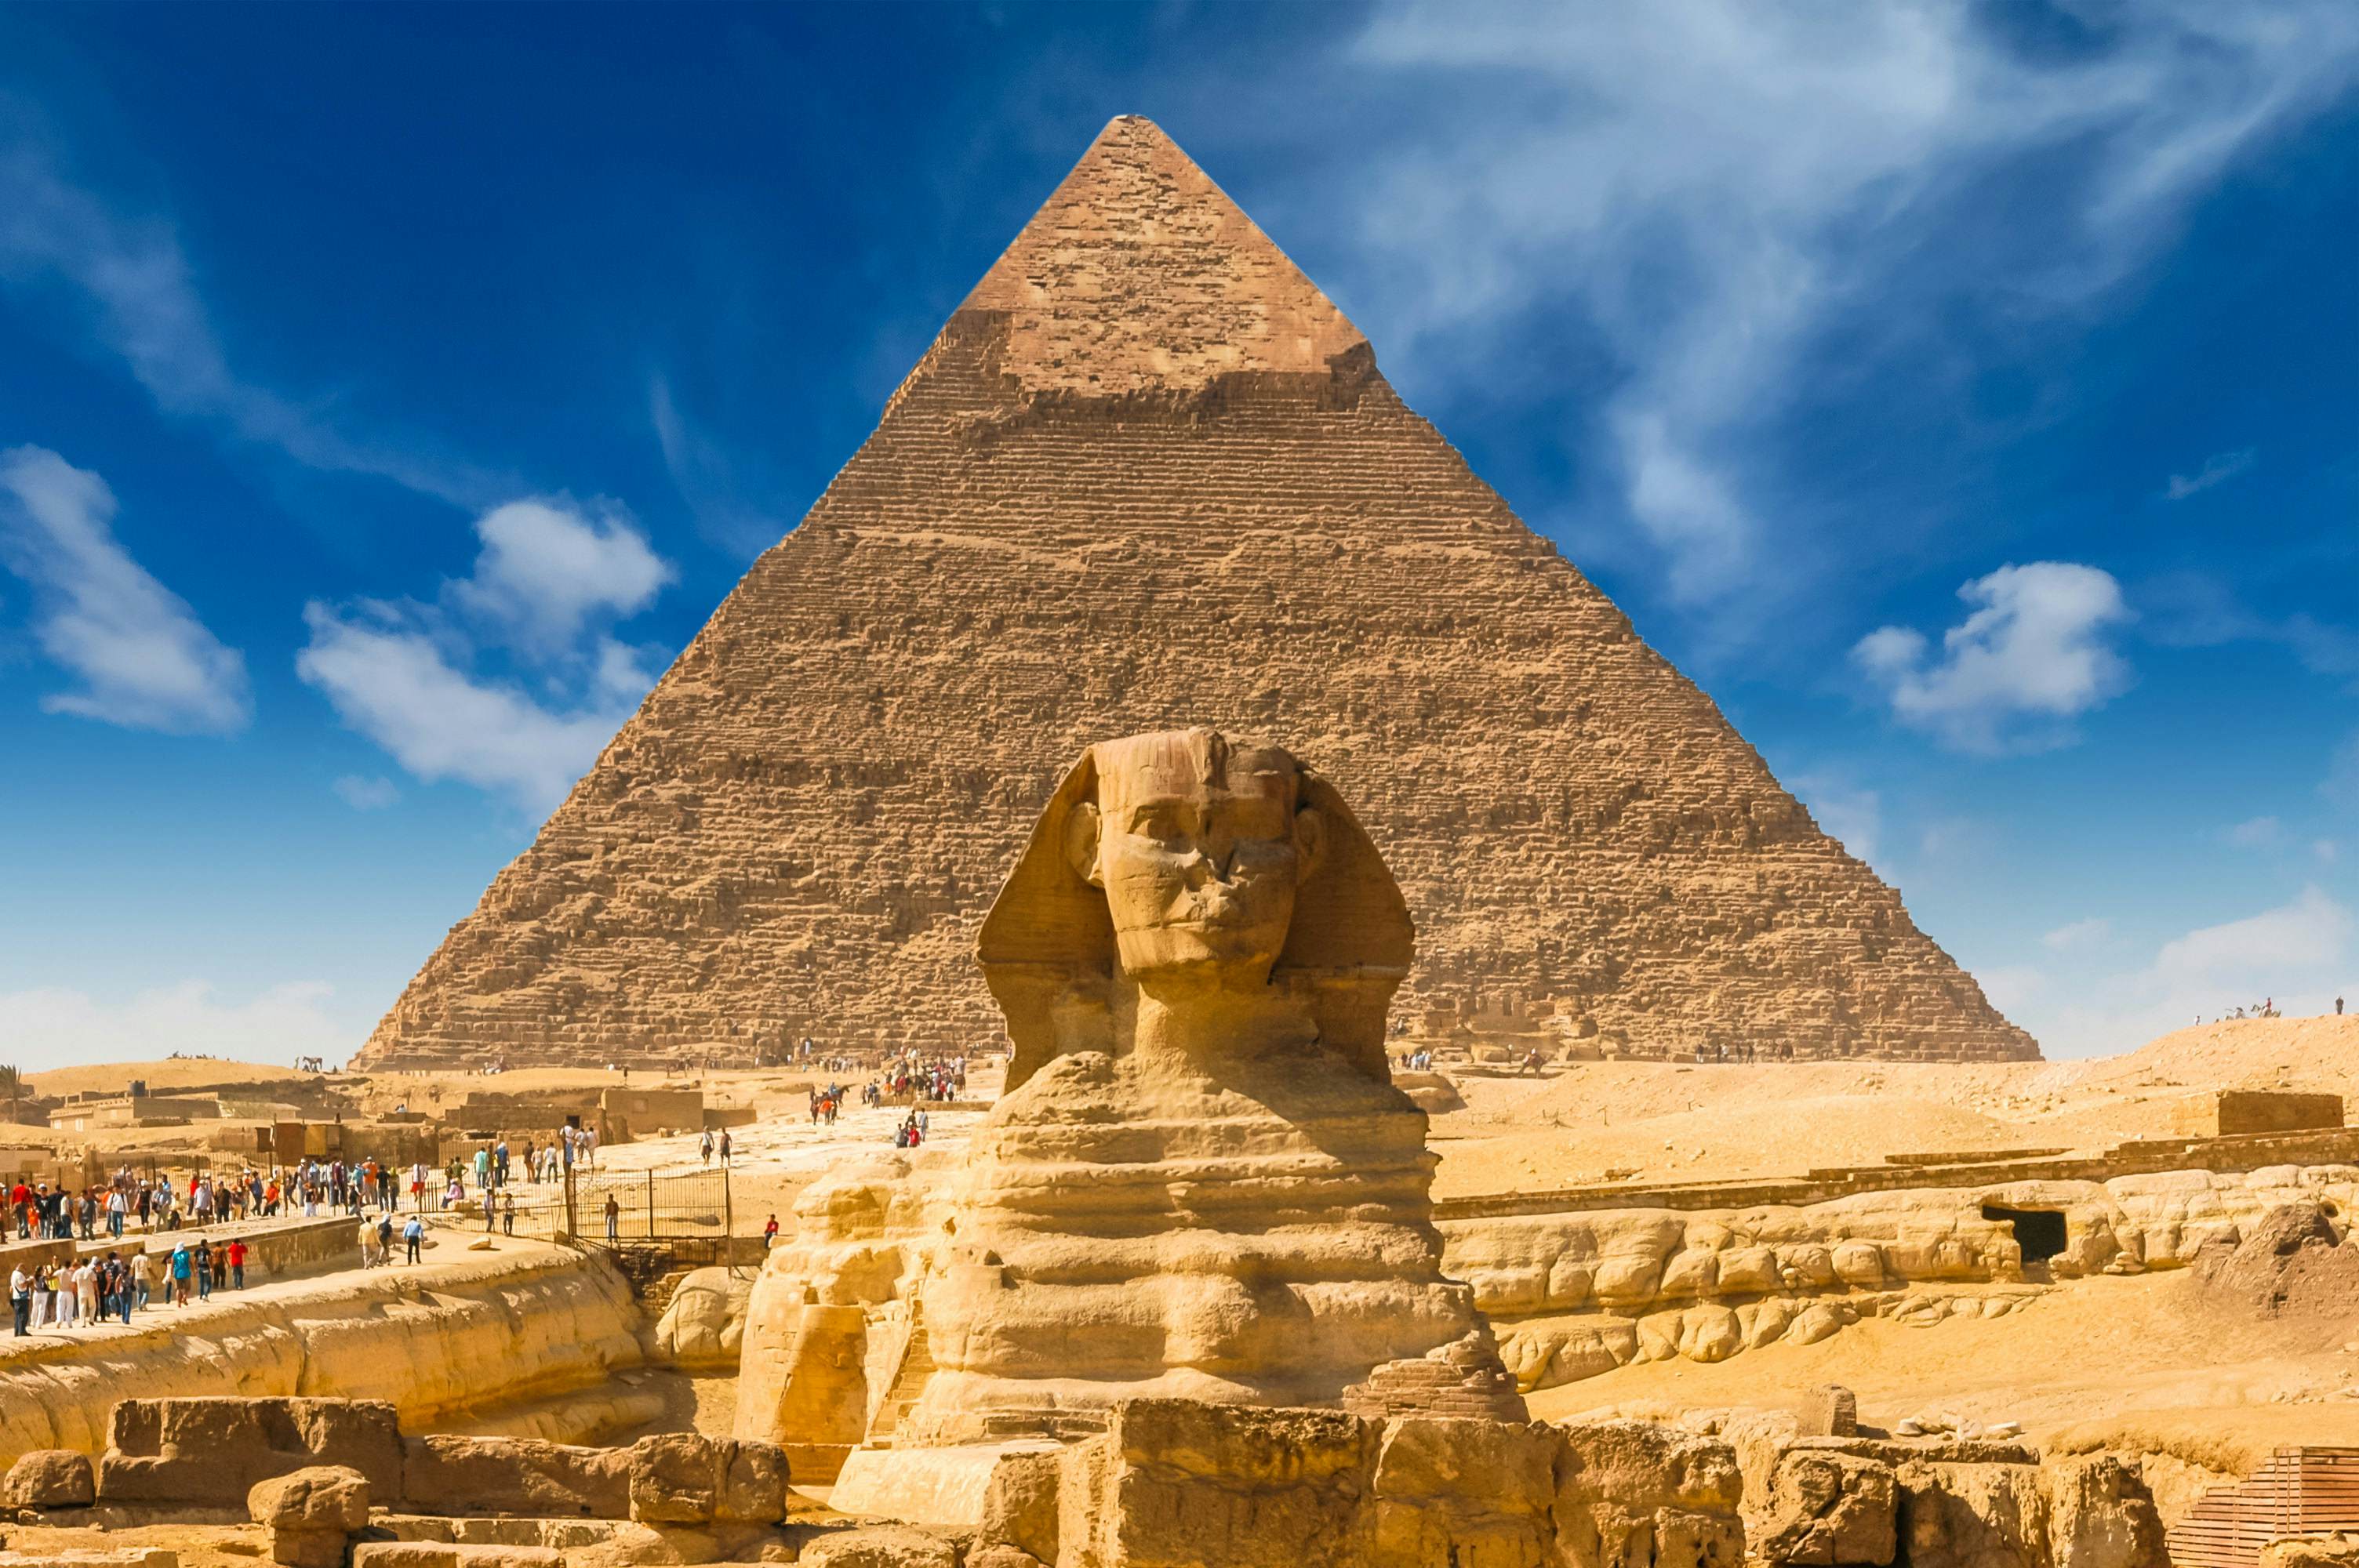 The Pyramids of Giza is undergoing a major revamp with new visitor  amenities - Lonely Planet